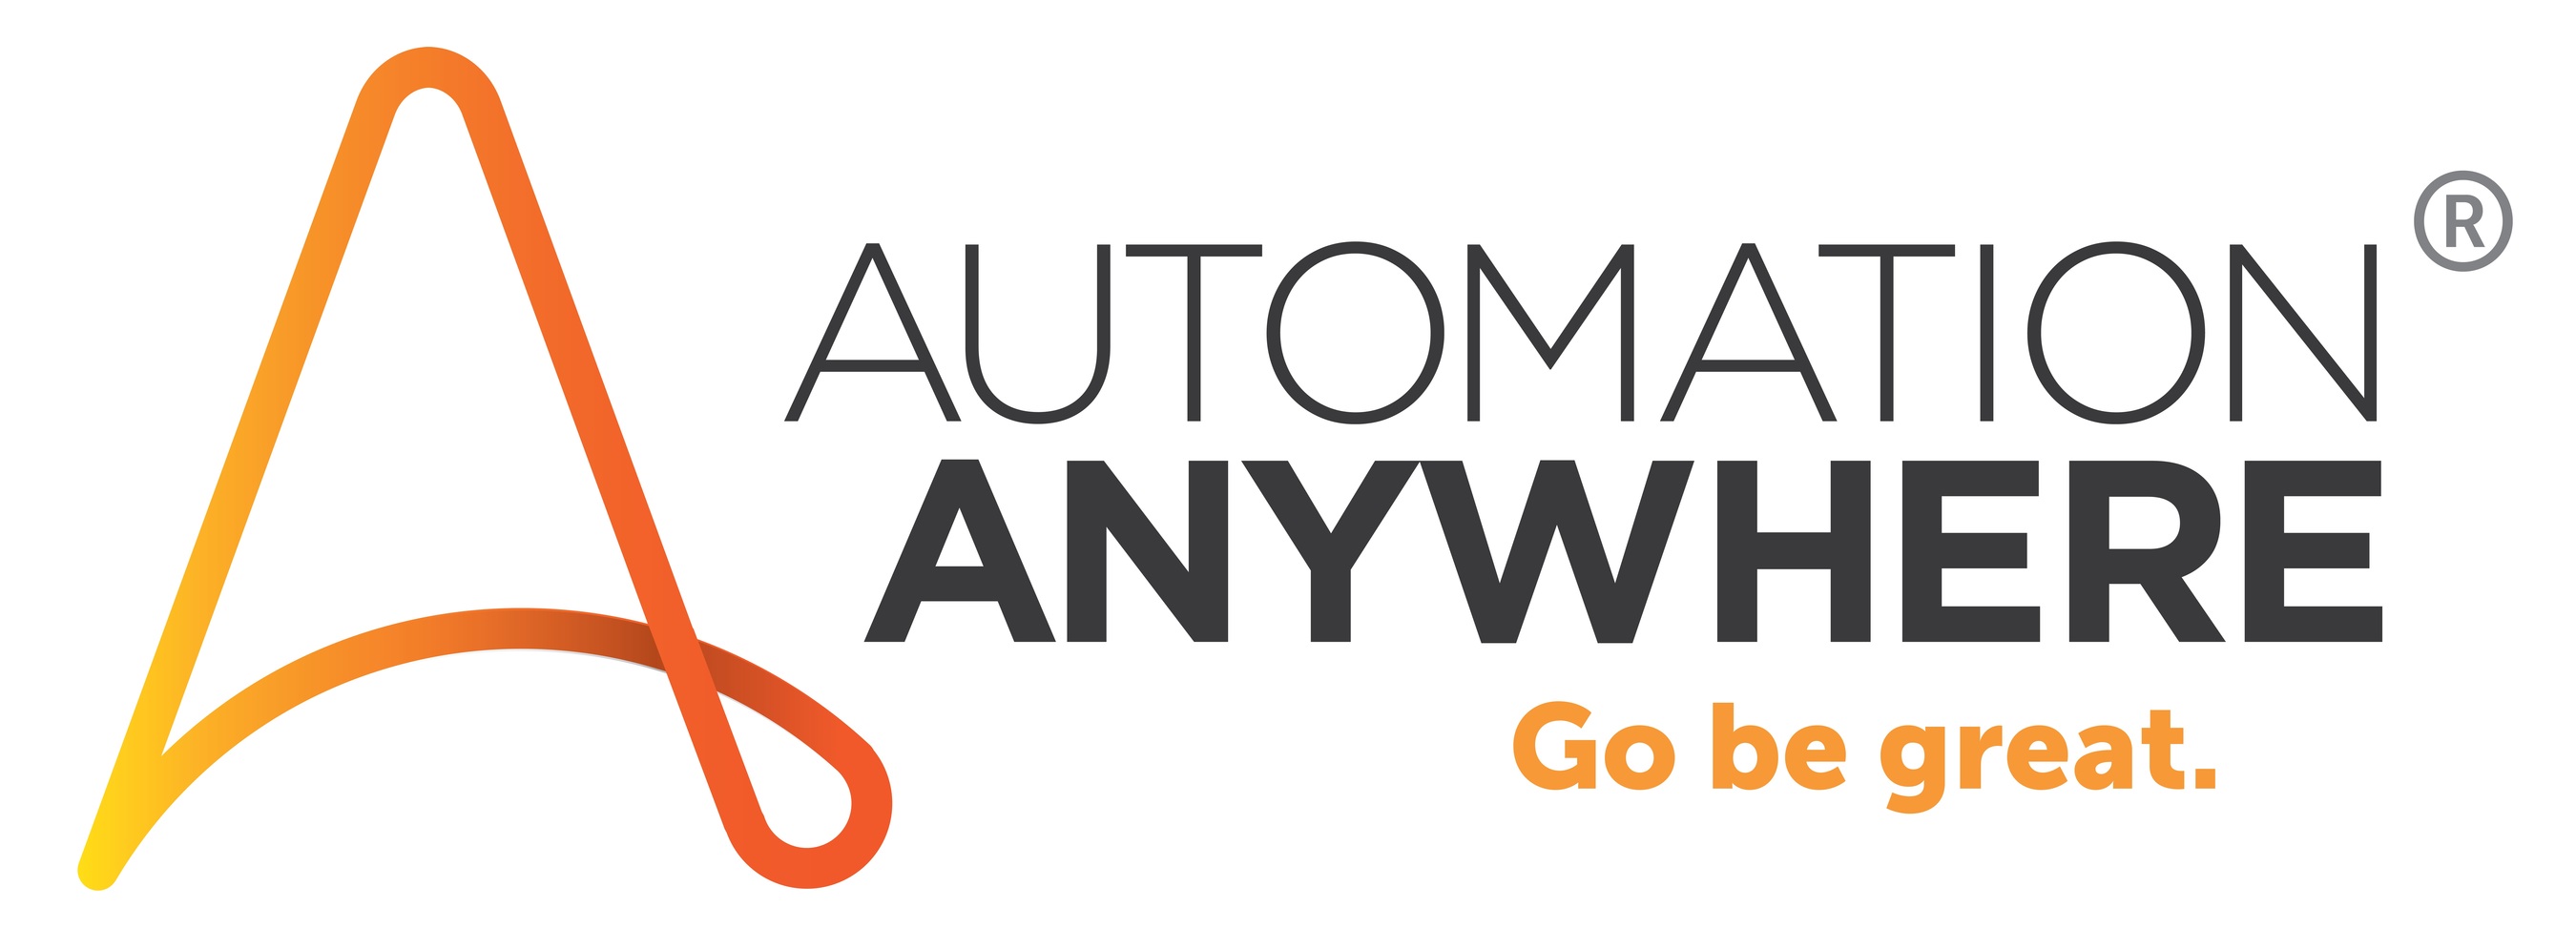 Automation Anywhere Announces Record Fourth Quarter Led by Strength of Gen AI-led Deals, Large Enterprise Customers and Strong Customer Retention